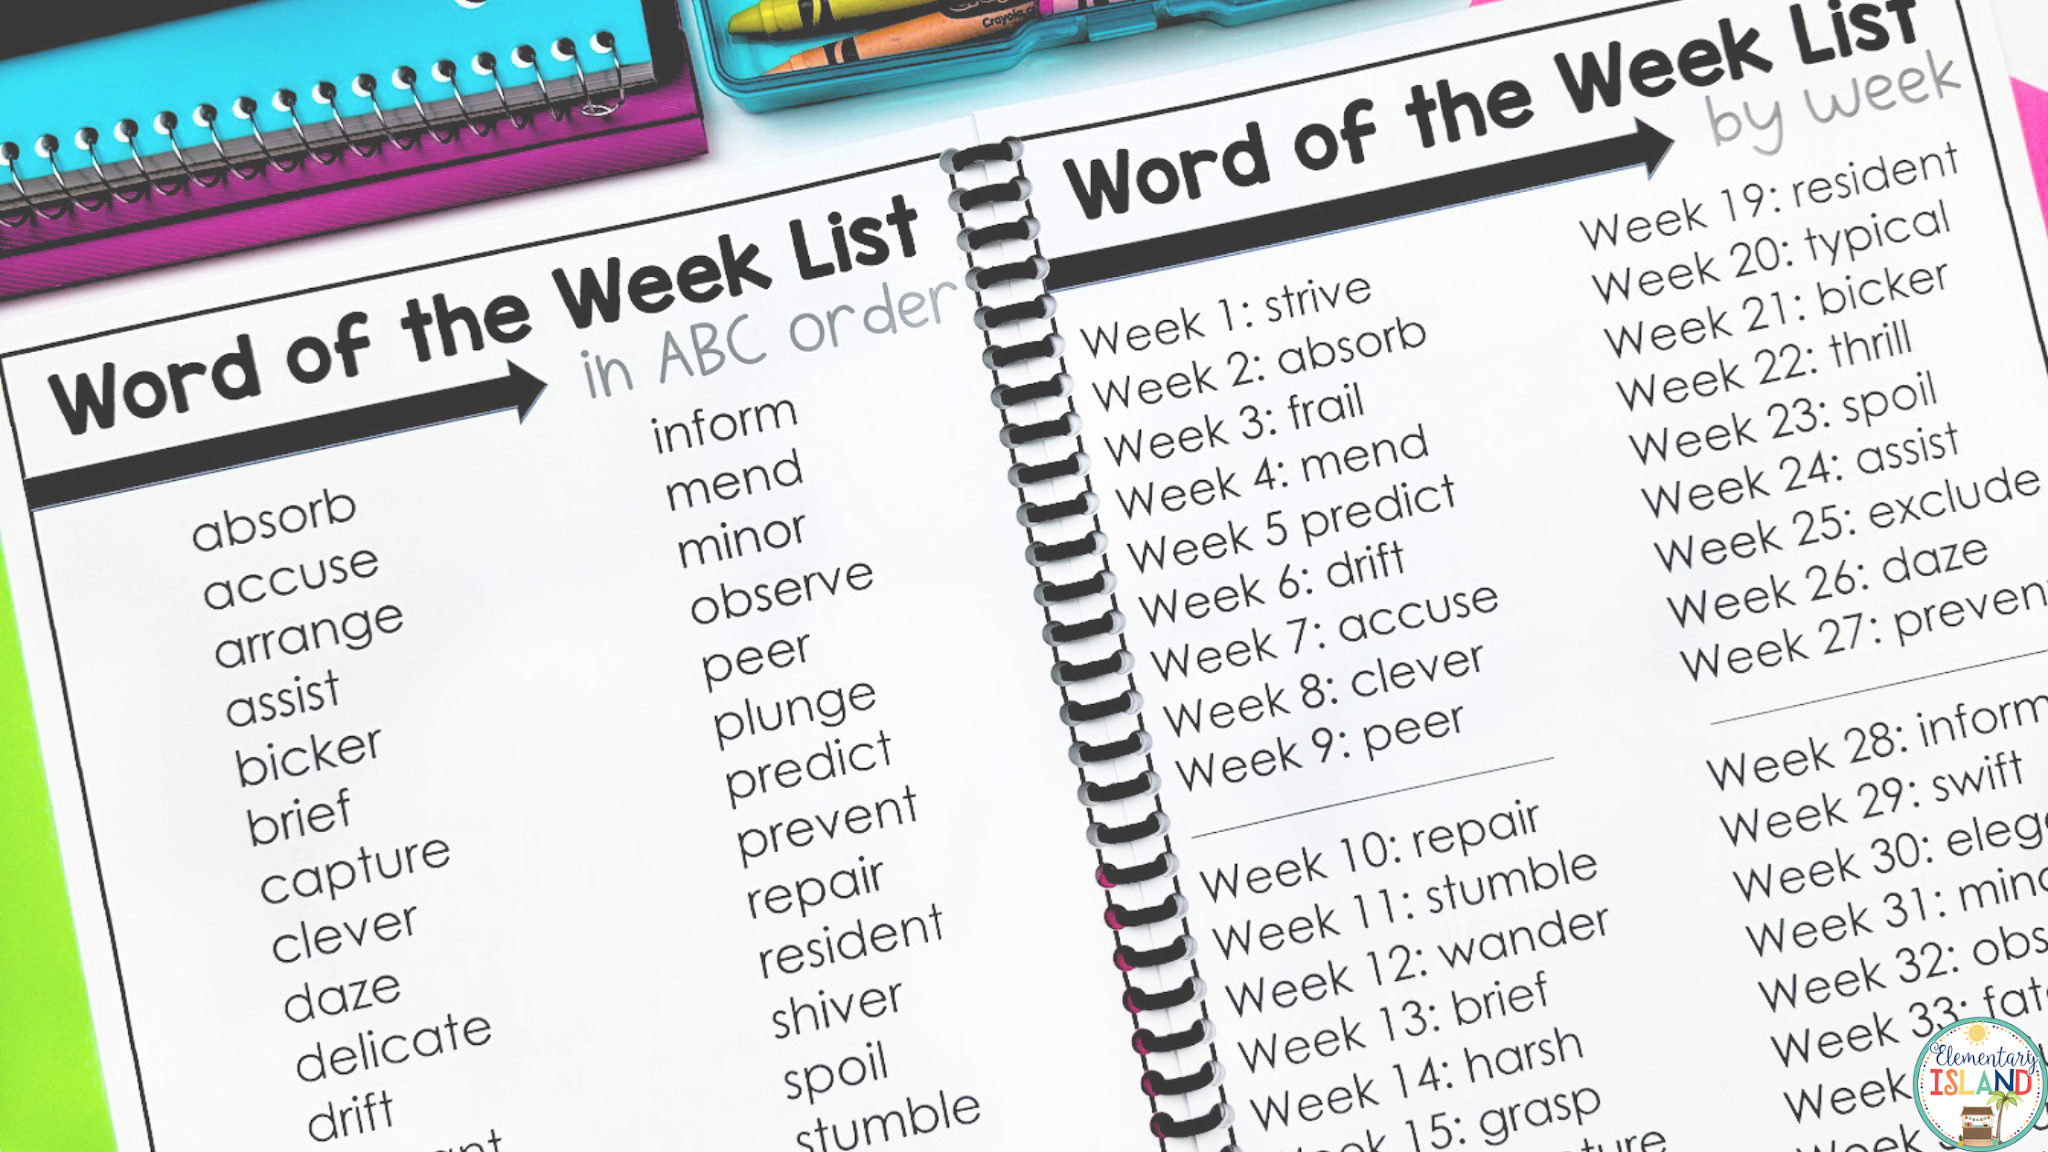 Implementing word of the week activities is easy when you can break up your weeks into manageable lists like these.